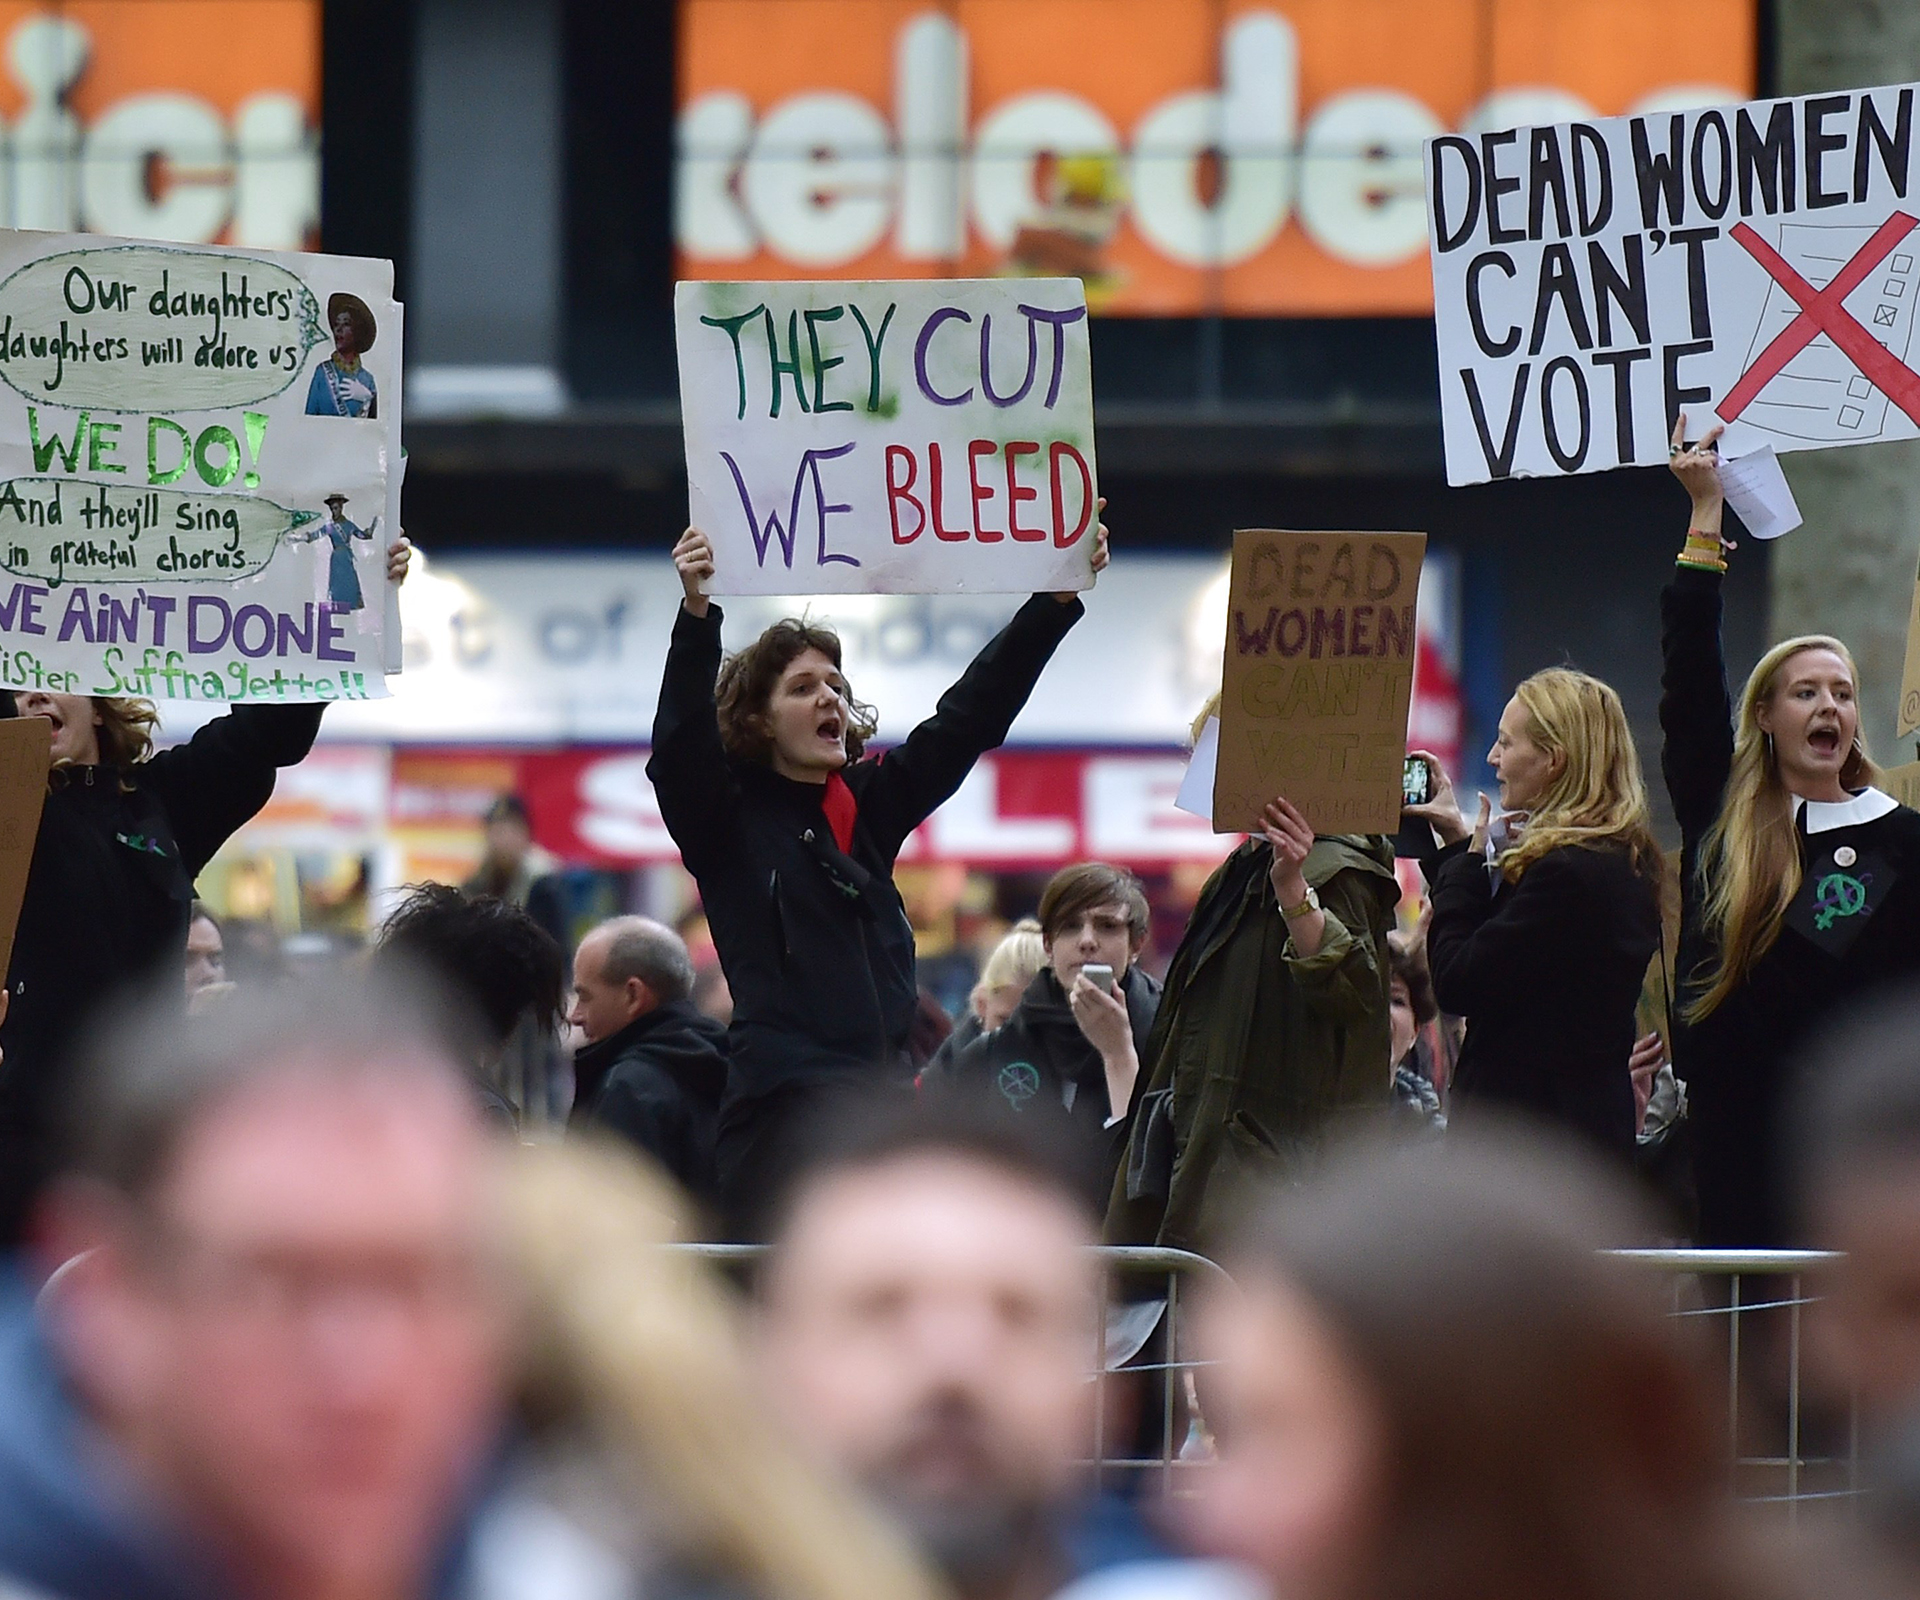 London suffragettes premiere interrupted by domestic violence protesters